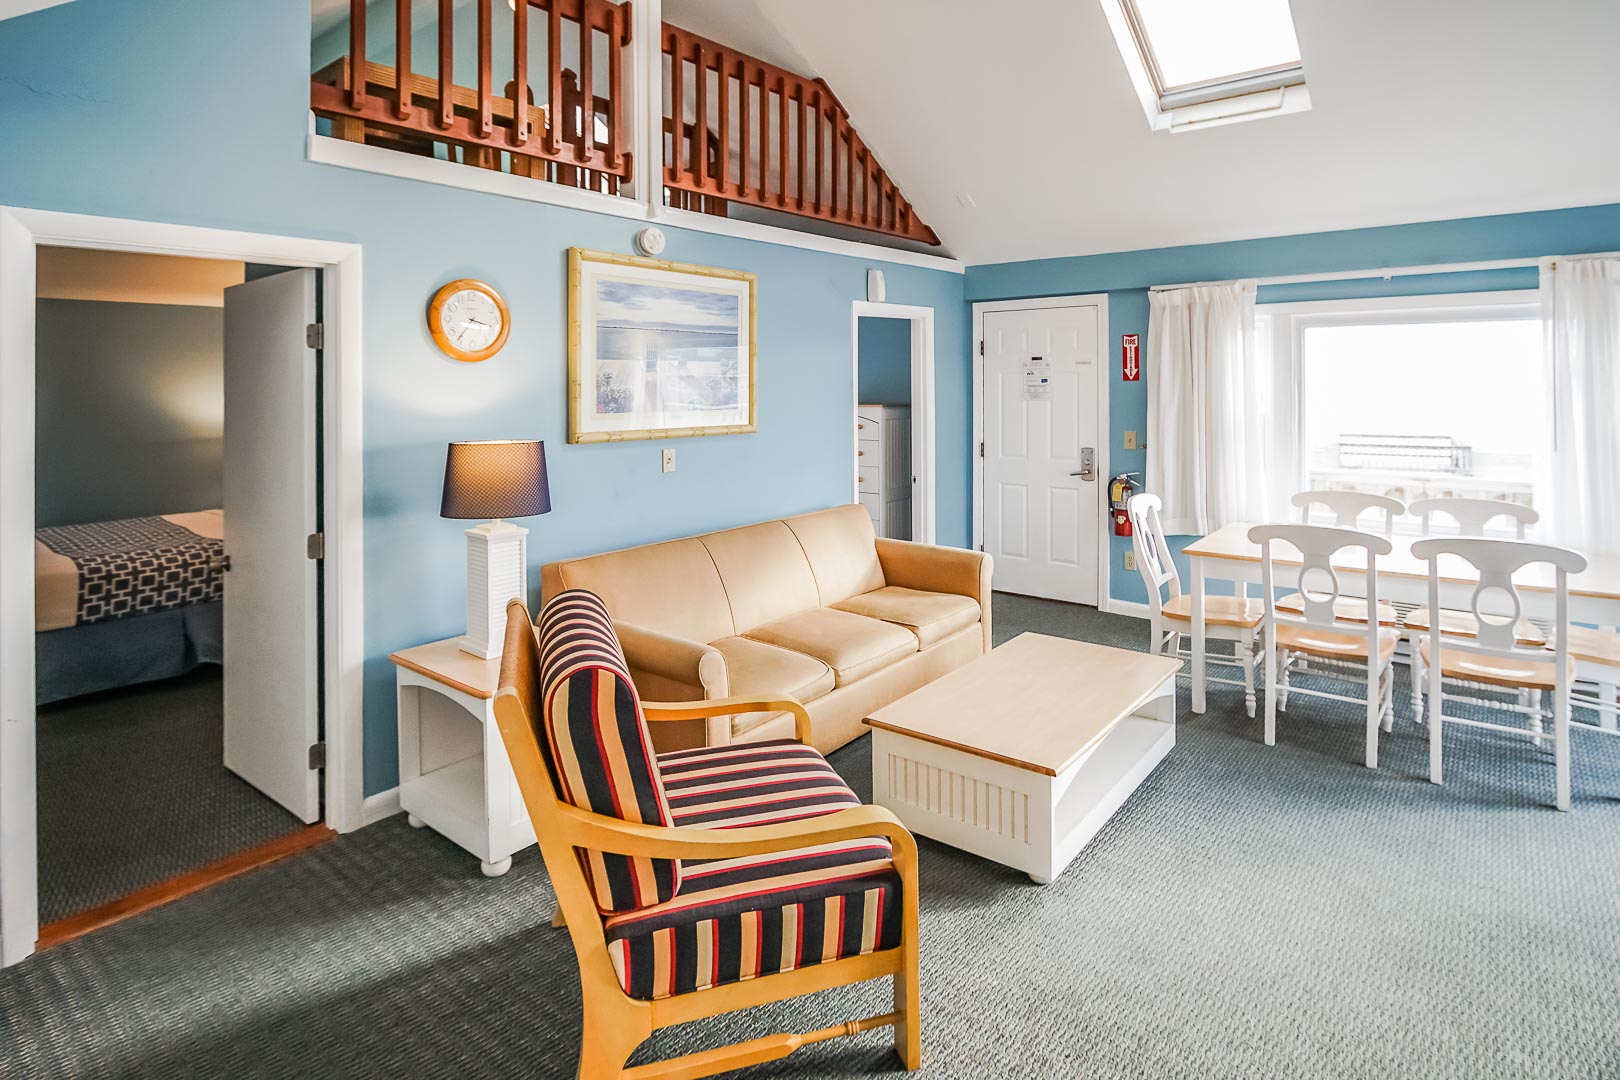 An expansive one bedroom with a loft at VRI's Seawinds II Resort in Massachusetts.